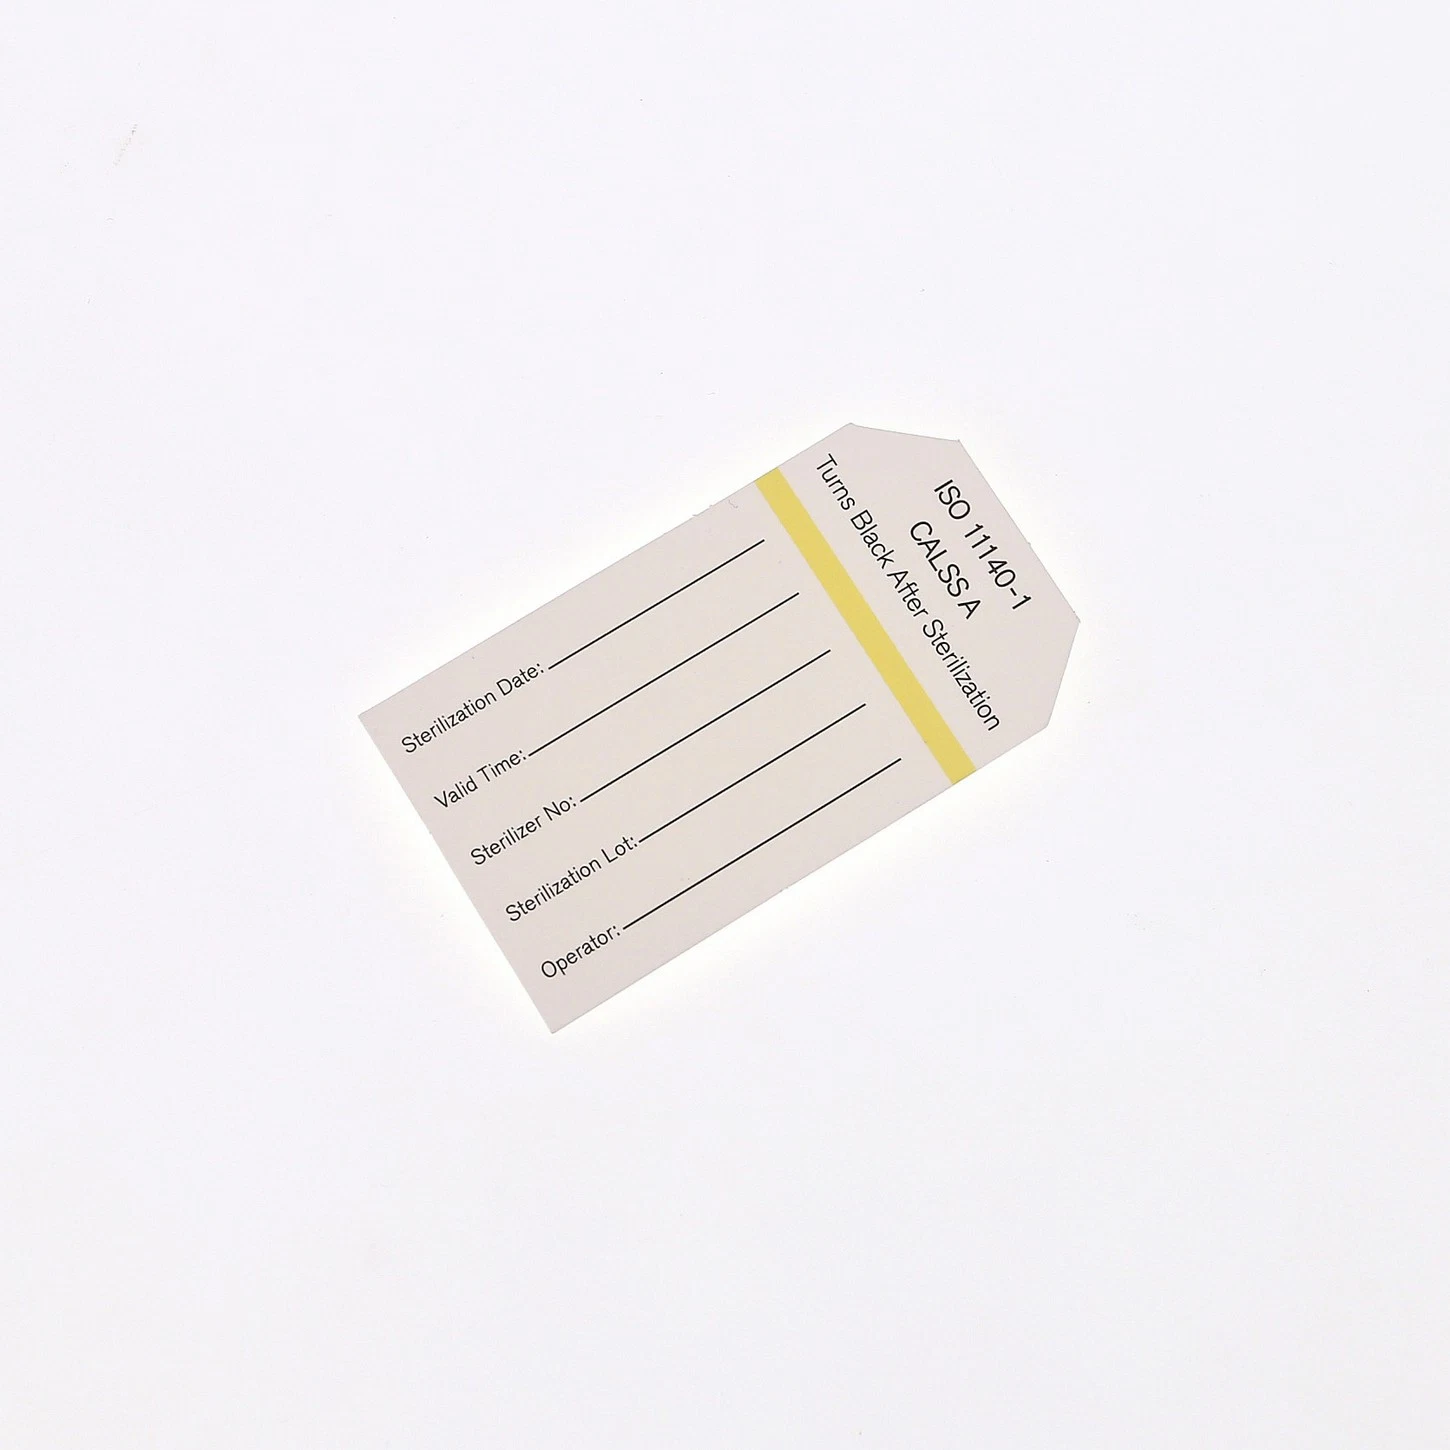 High Pressure Disposable Autoclave/ Steam Indicator Card for Medical Infection Control